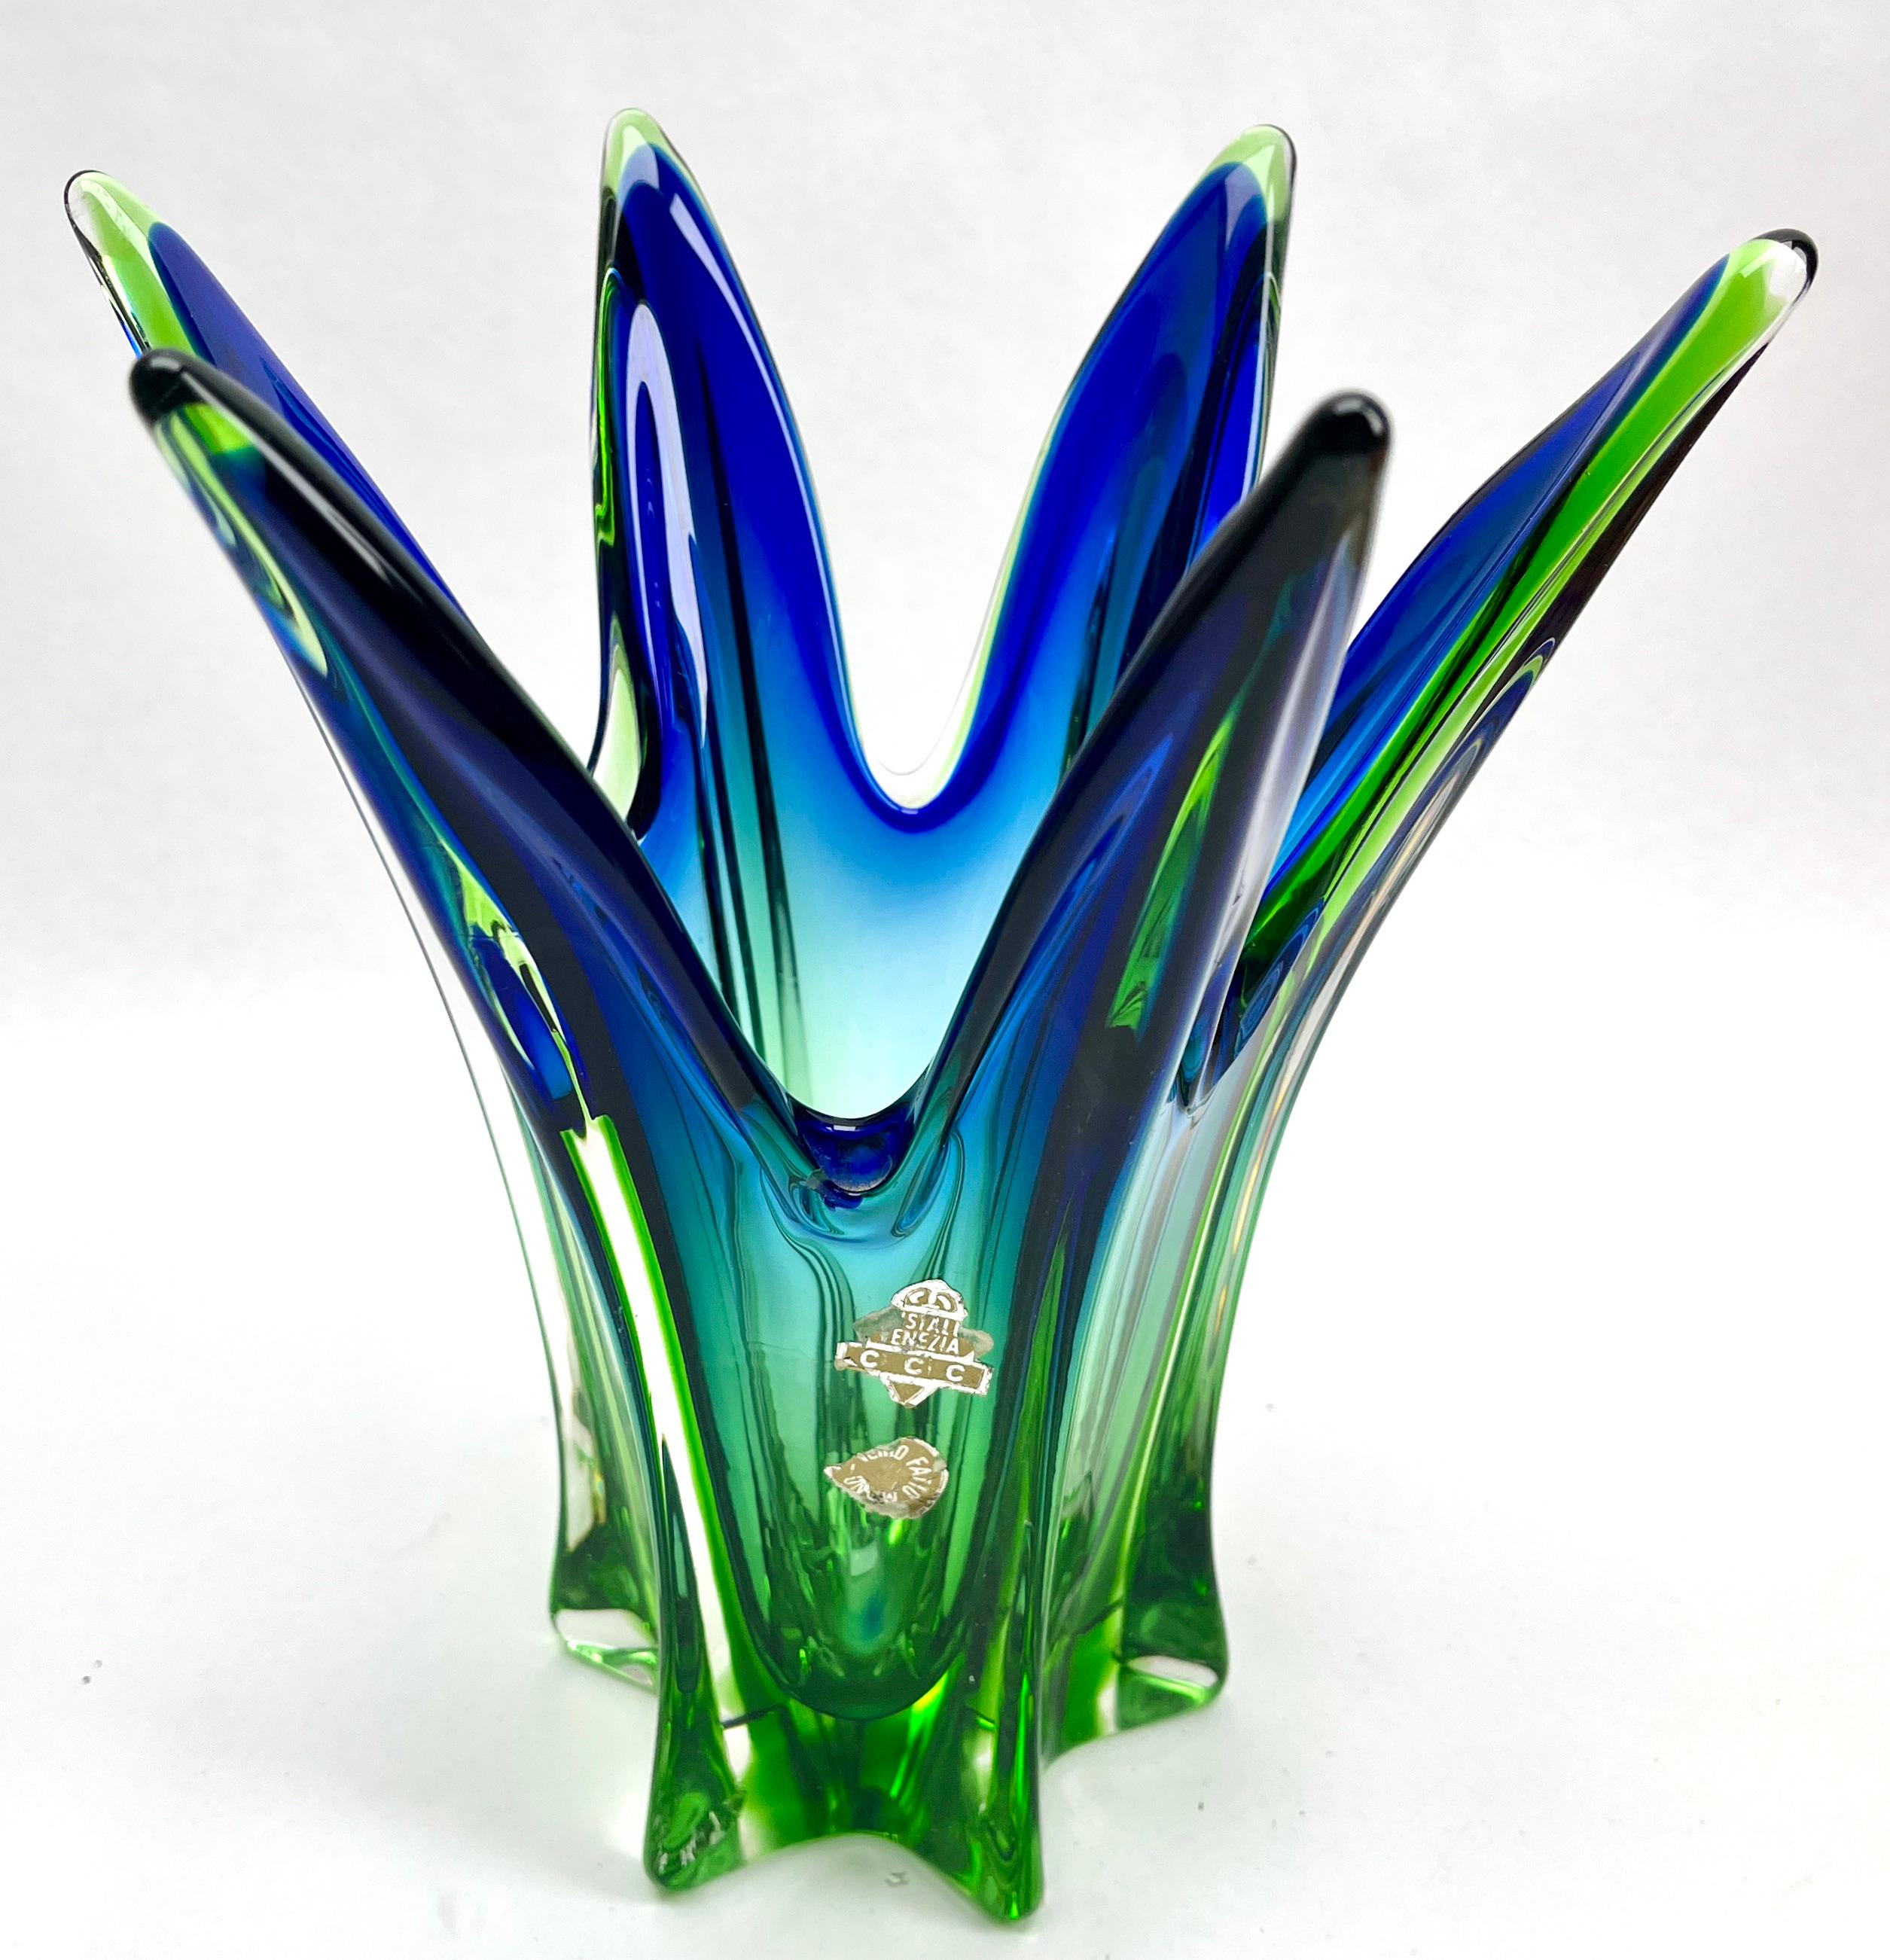 Mid-Century Modern Solid Crystal Biomorphic Vase with Waves of Bright Green and Sommerso Bohemian